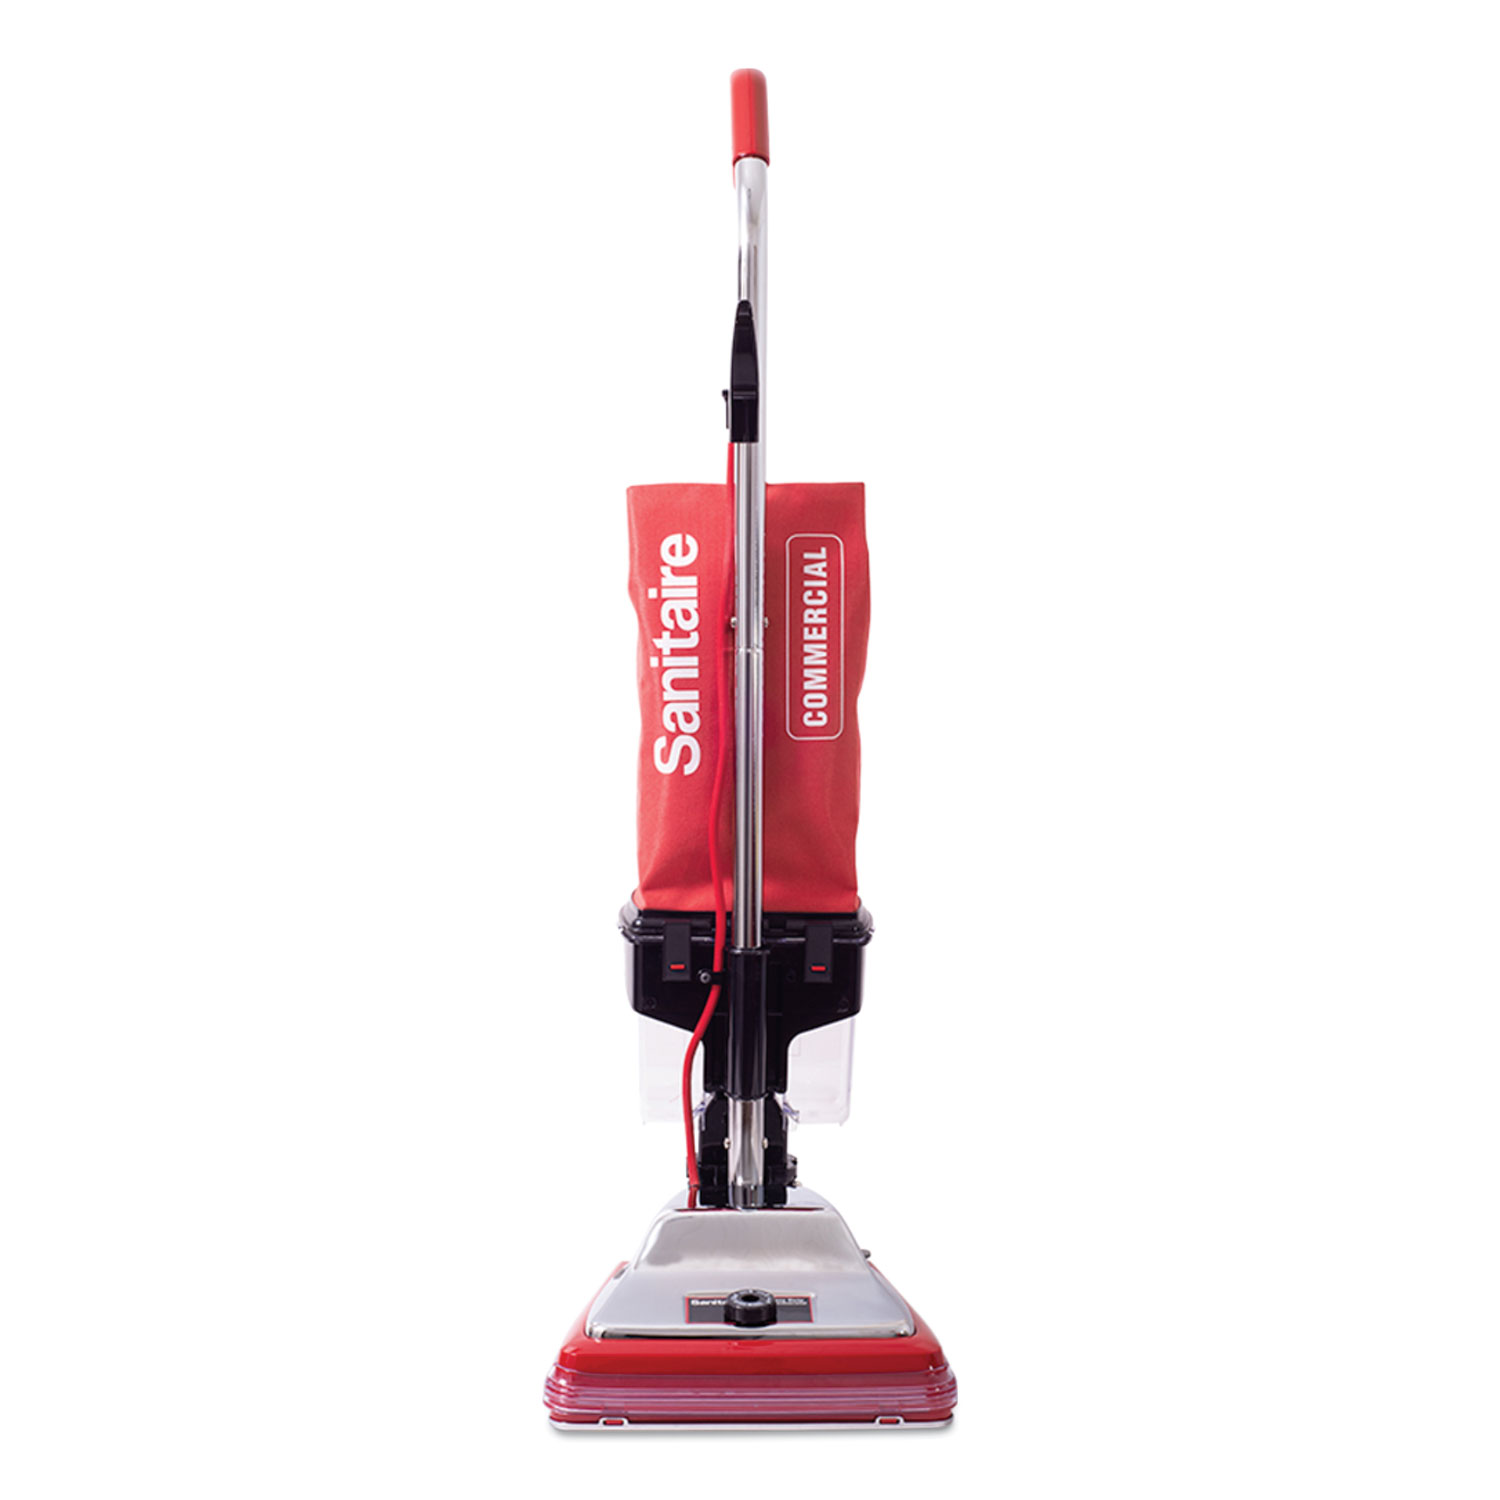  Sanitaire SC887E TRADITION Upright Vacuum with Dust Cup, 7 Amp, 12 Path, Red/Steel (EURSC887E) 